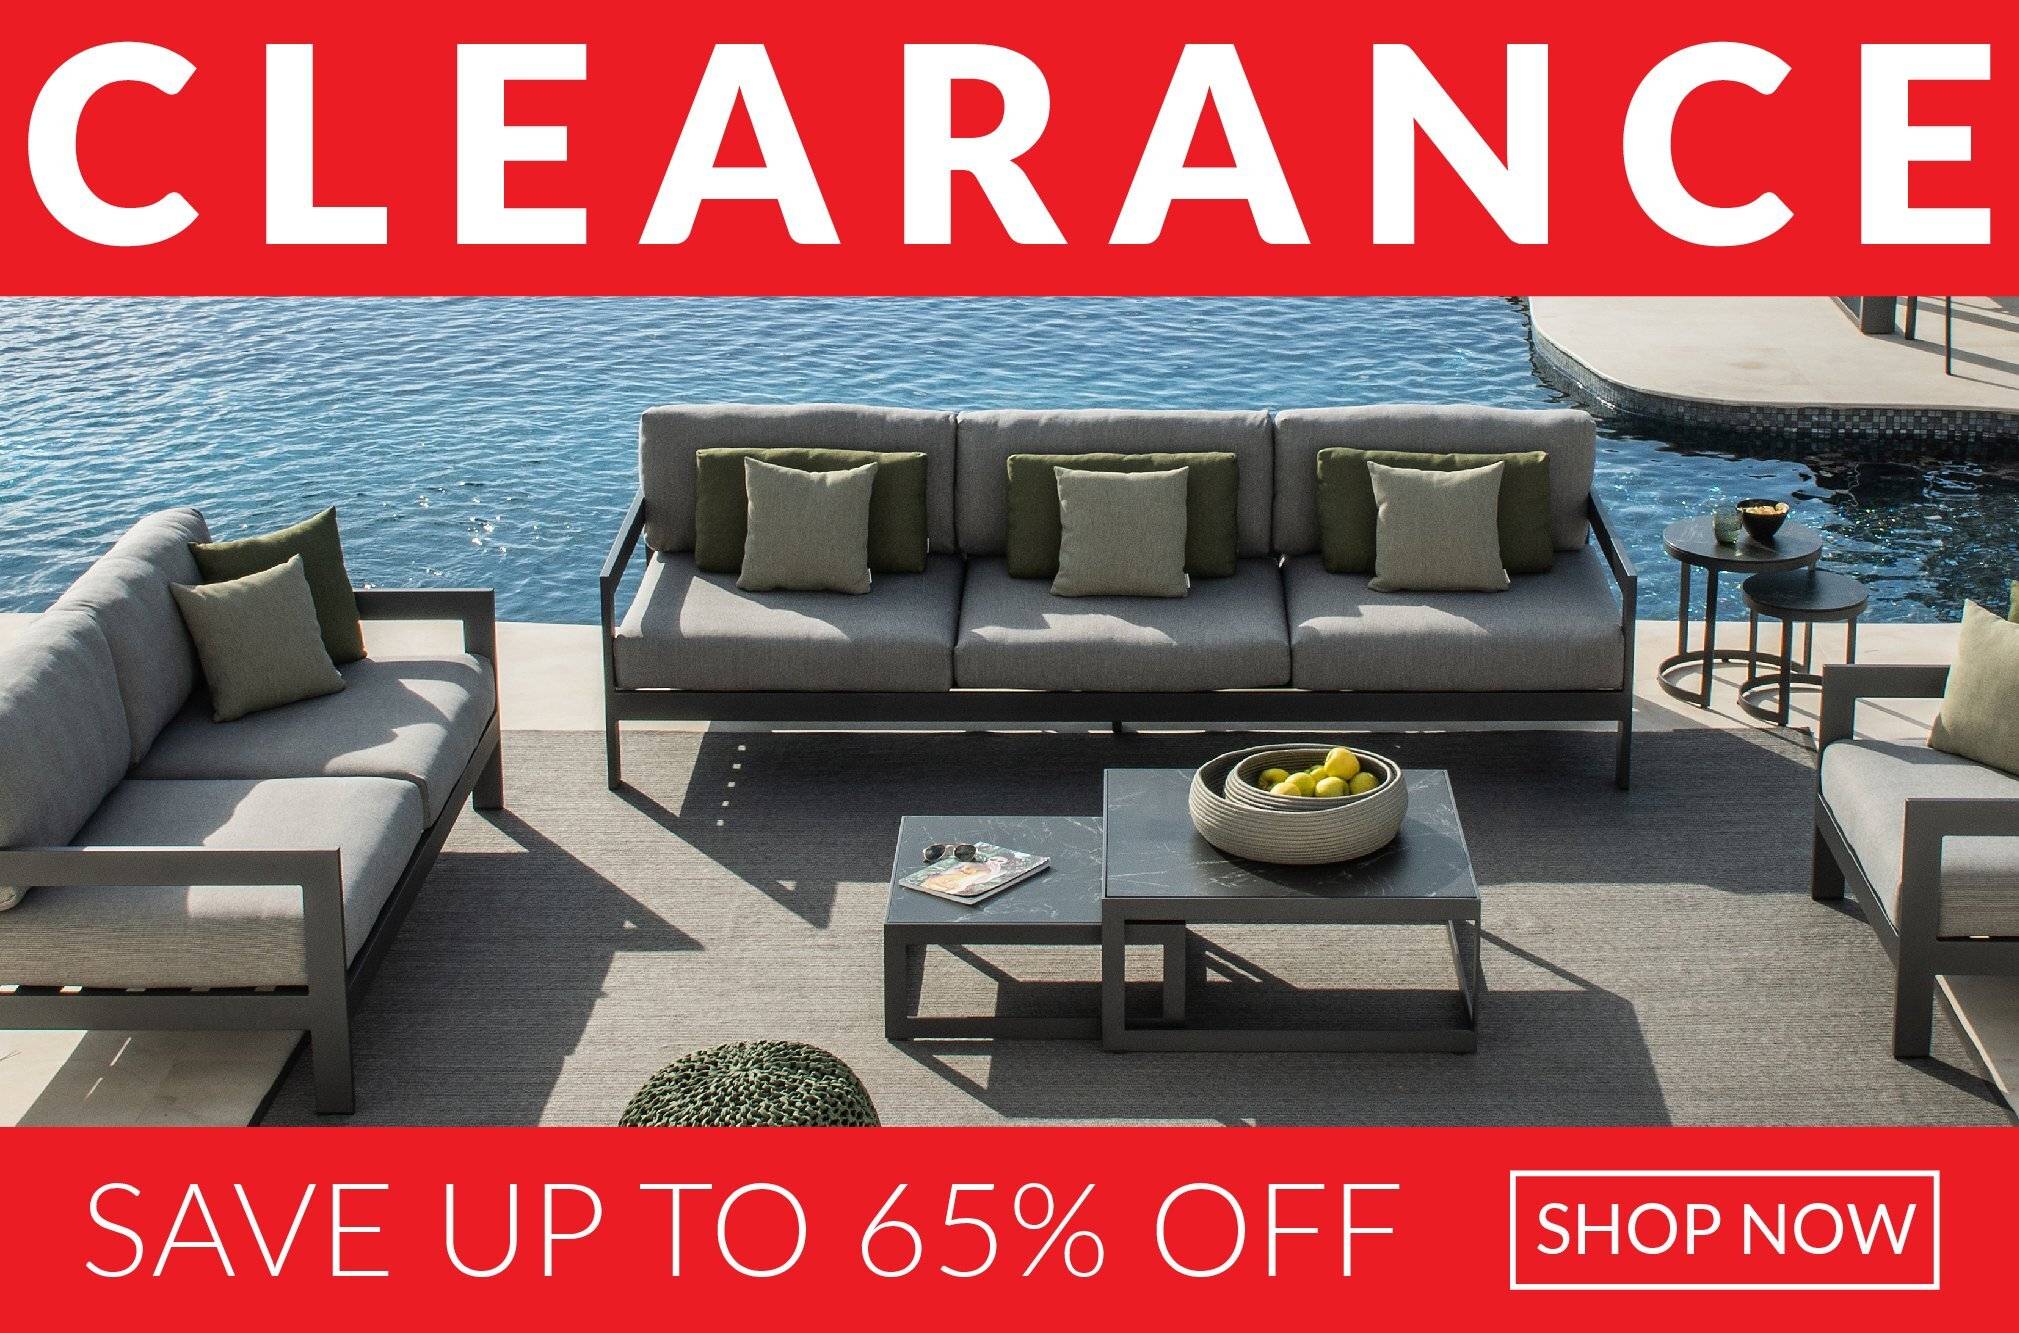 Clearance Sale on Vigo Outdoor Seating - Save up to 65% off